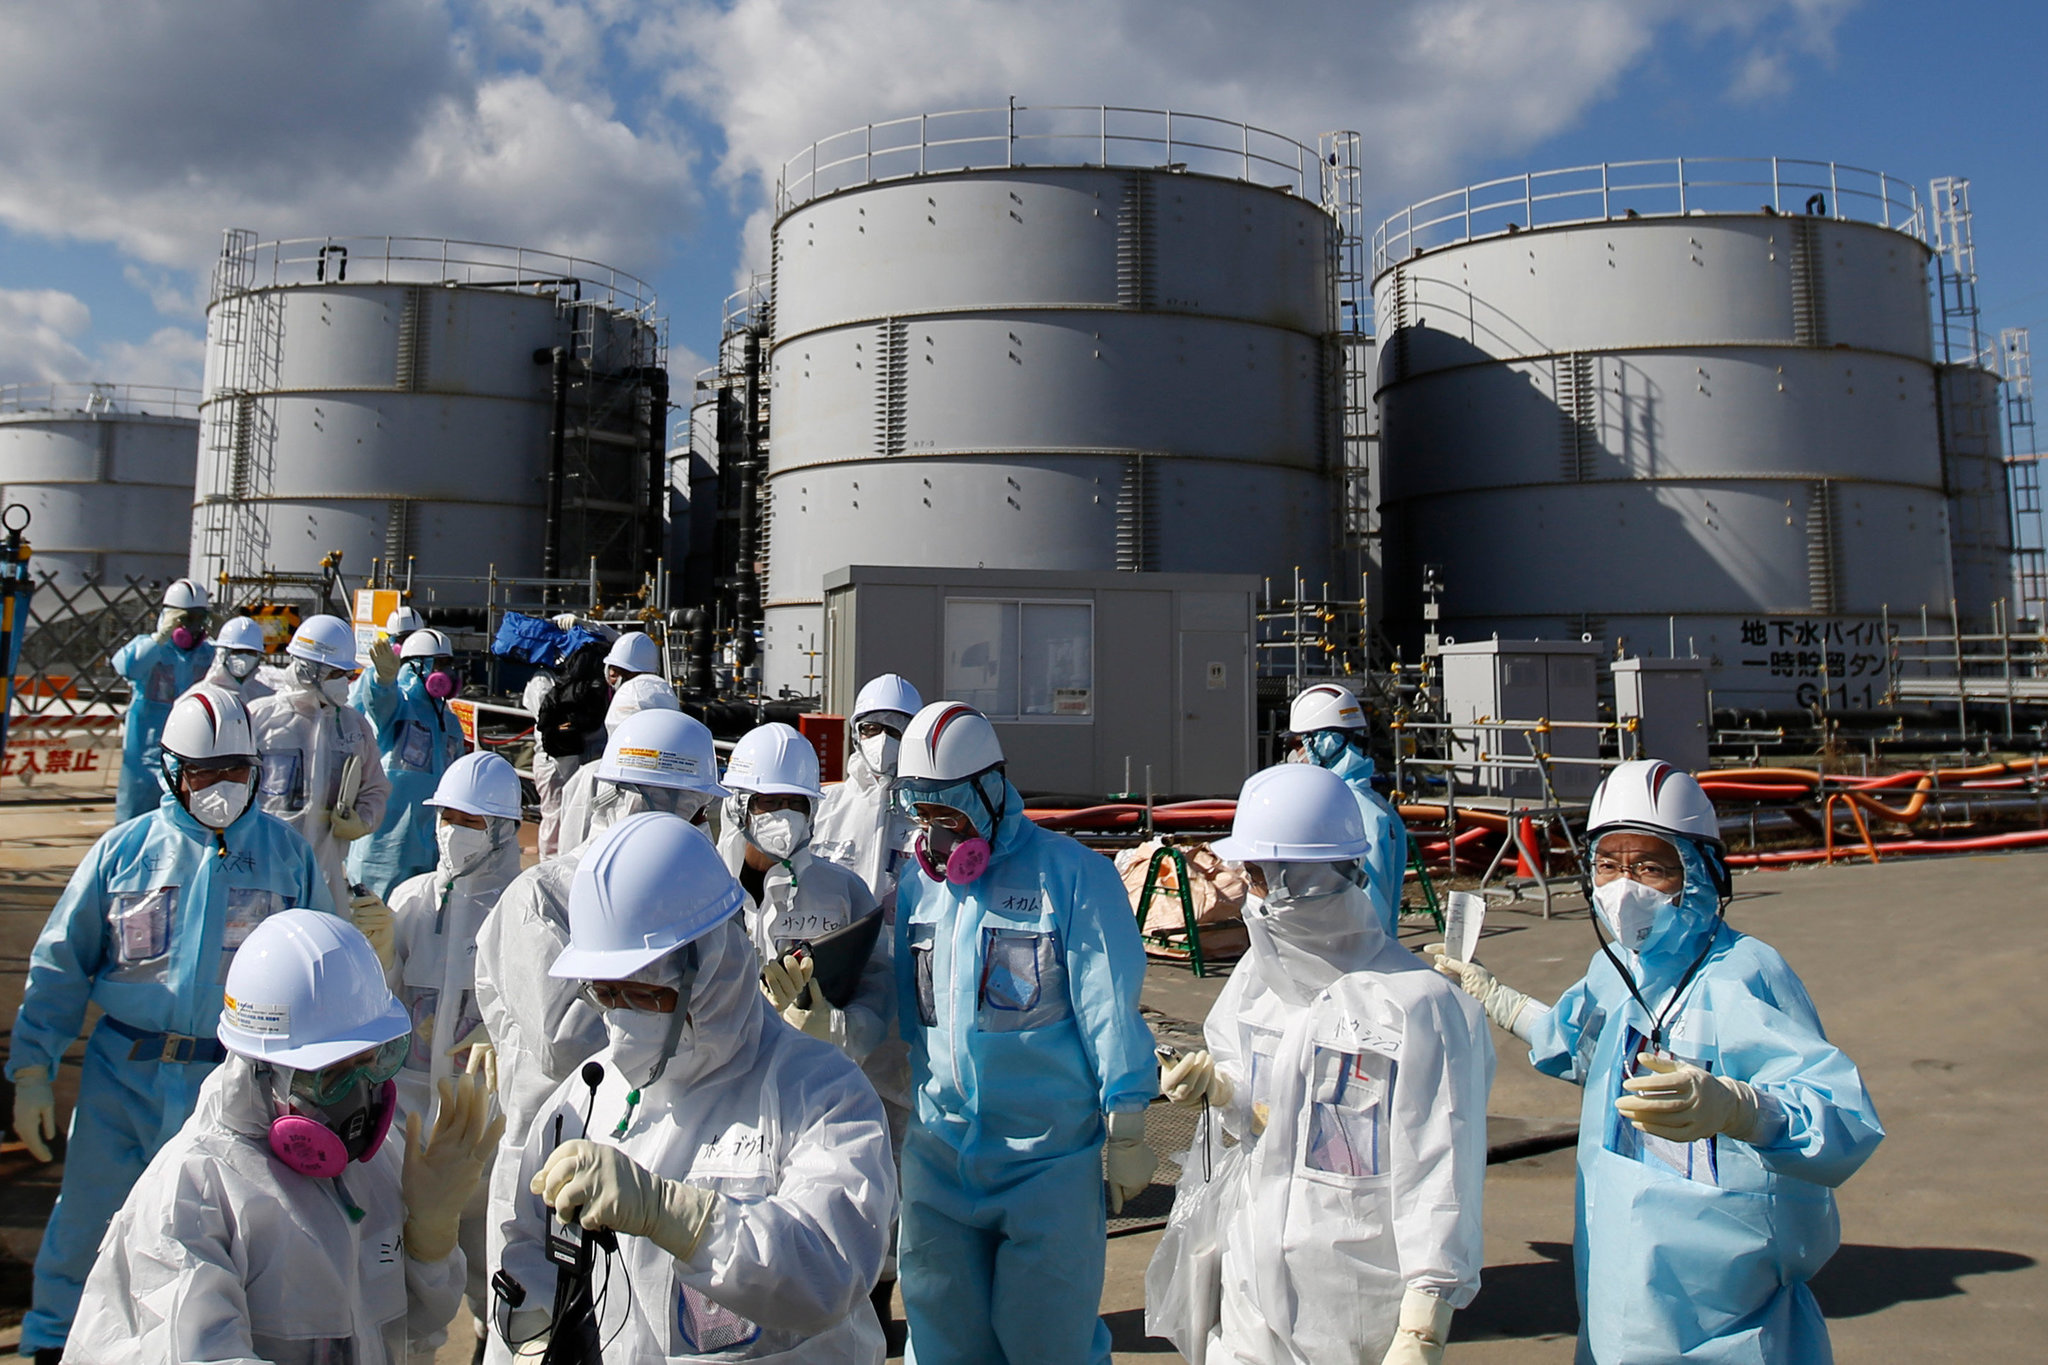 UN radiation report finds Fukushima caused no additional cancer risk